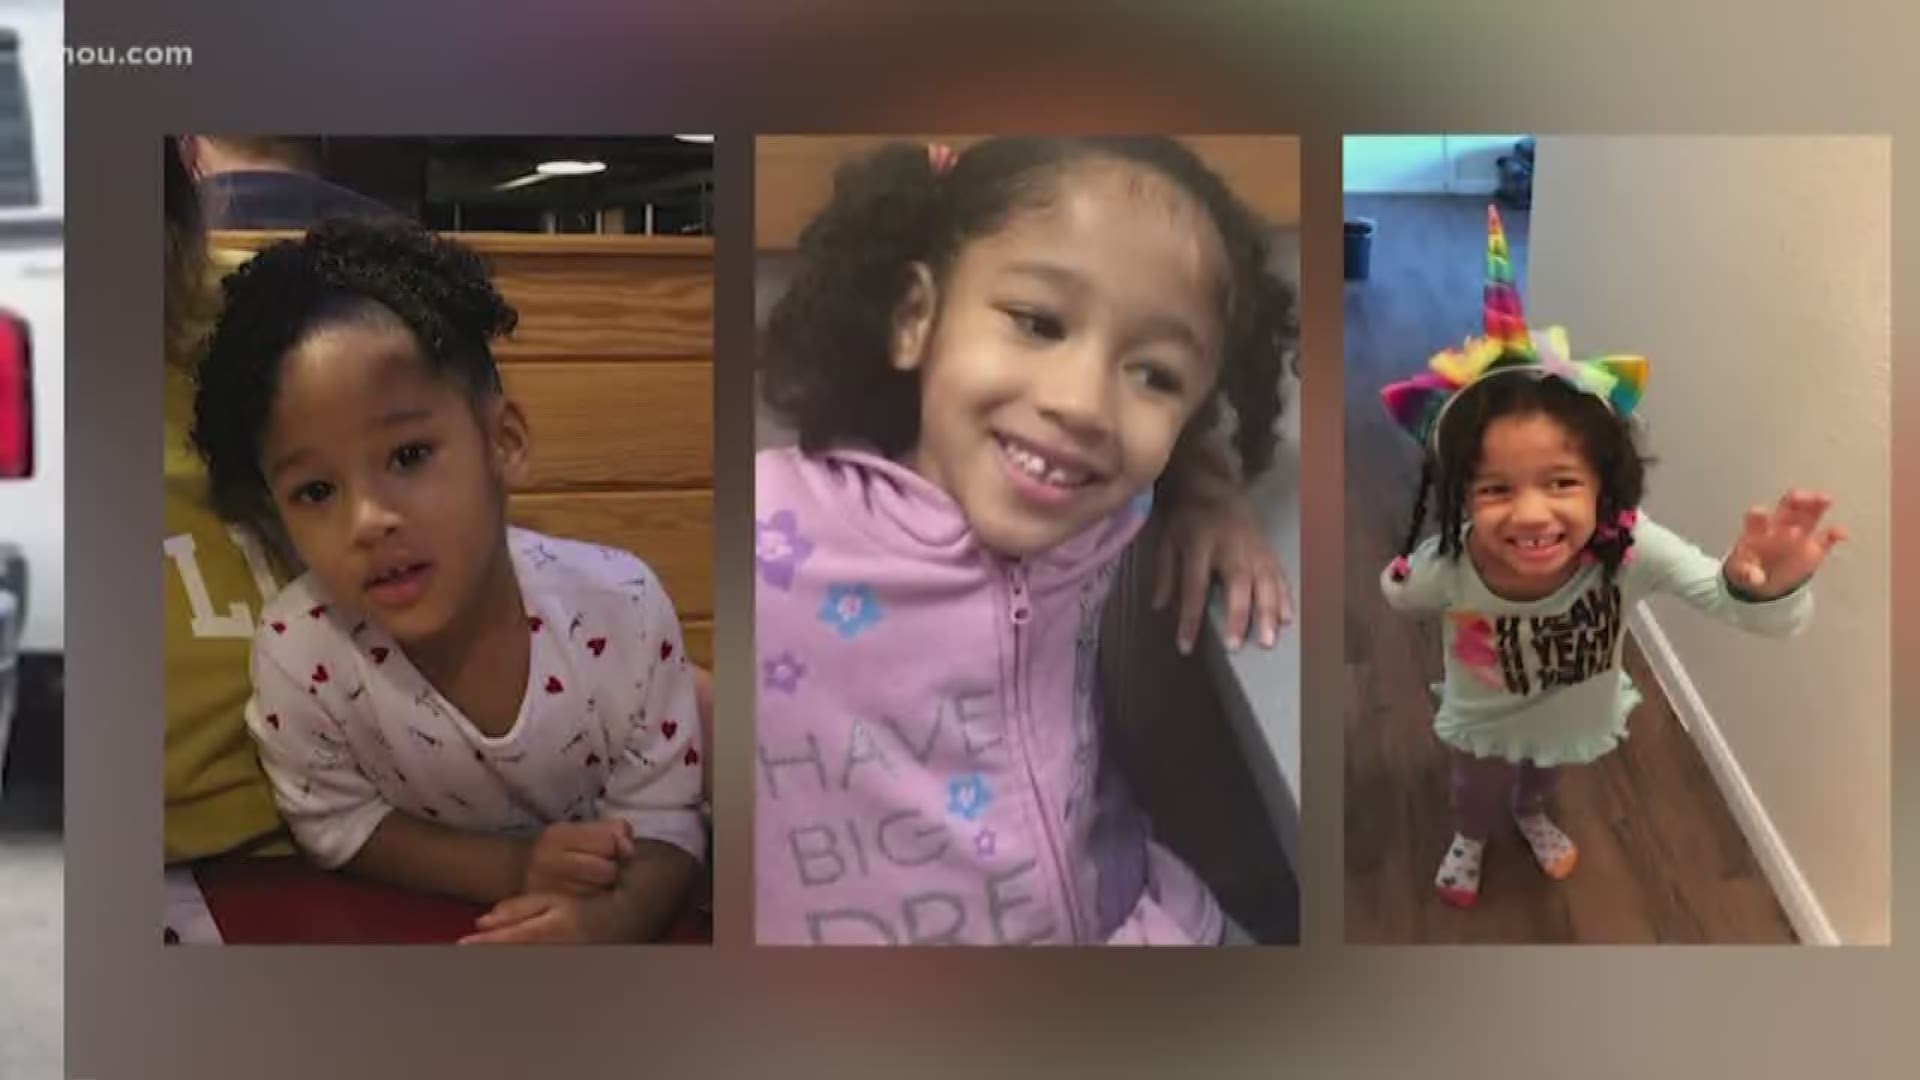 Volunteers with the search group Texas Equusearch joined the effort Monday to find 4-year-old Maleah Davis who was reported missing in Houston on Friday evening.